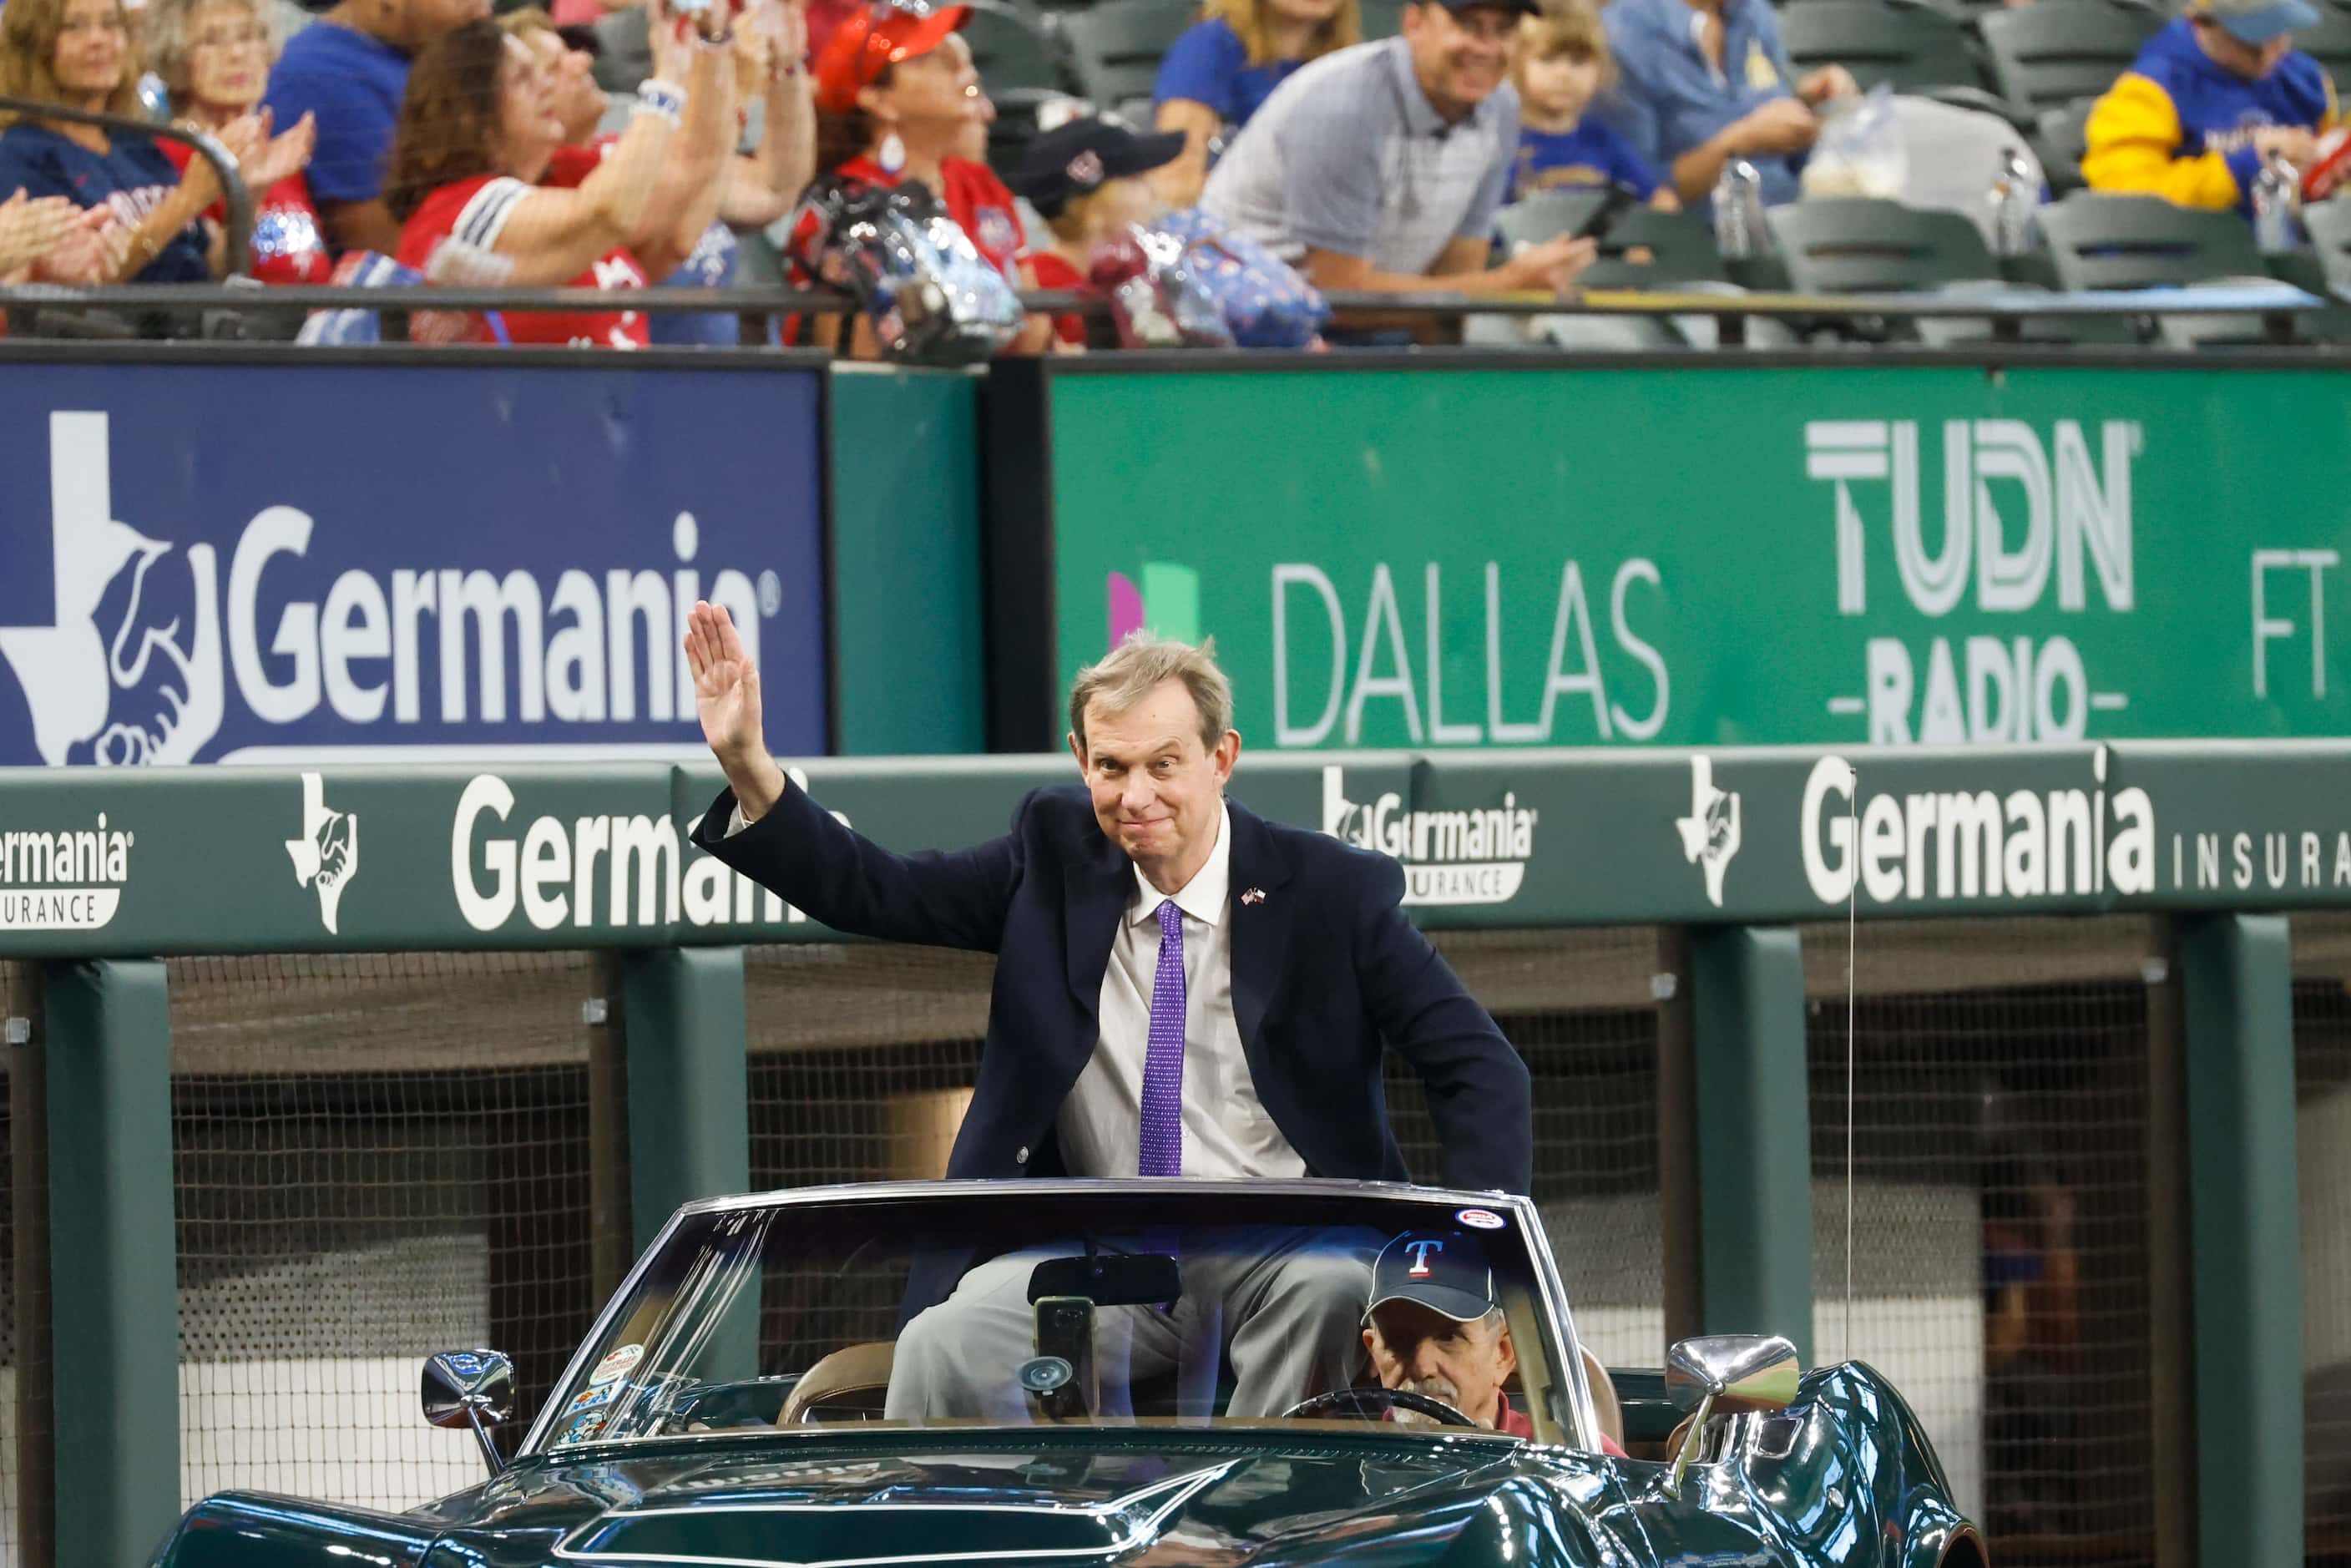 Texas Rangers media VP John Blake waves as he arrives at the induction ceremony at Globe...